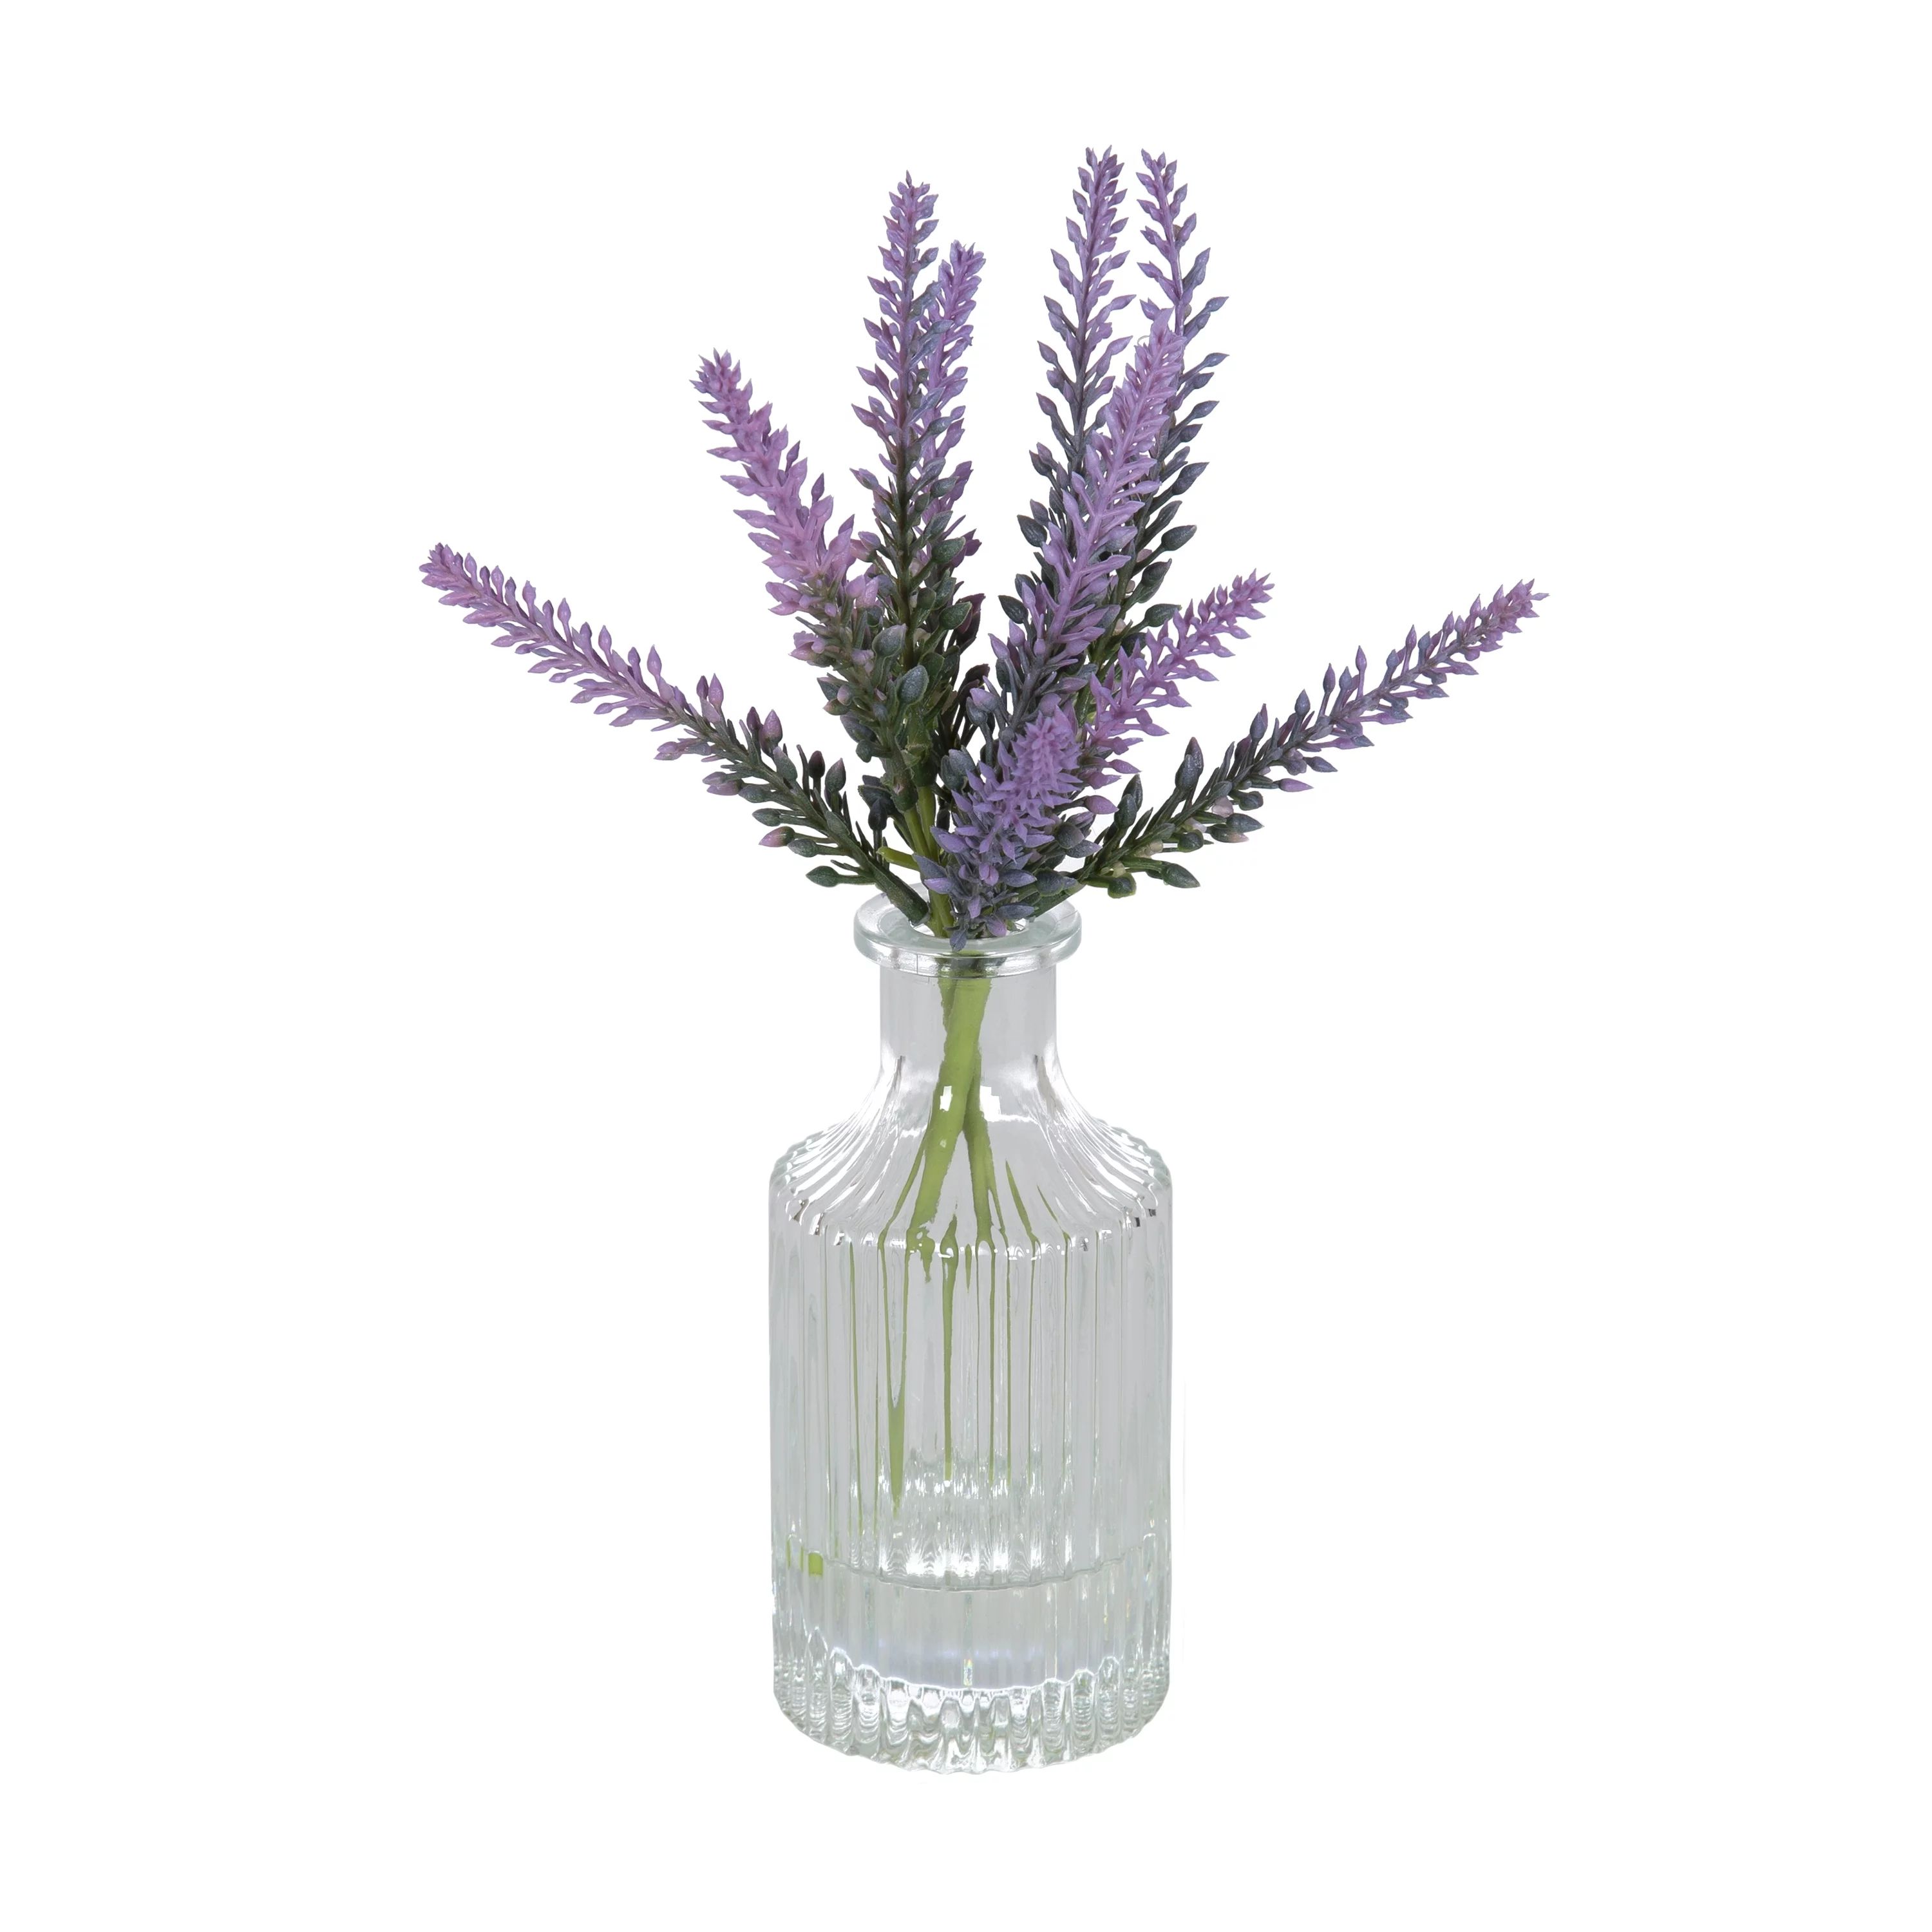 Mainstays 10.5" Artificial Lavender Flower Stems in Ribbed Glass Vase | Walmart (US)